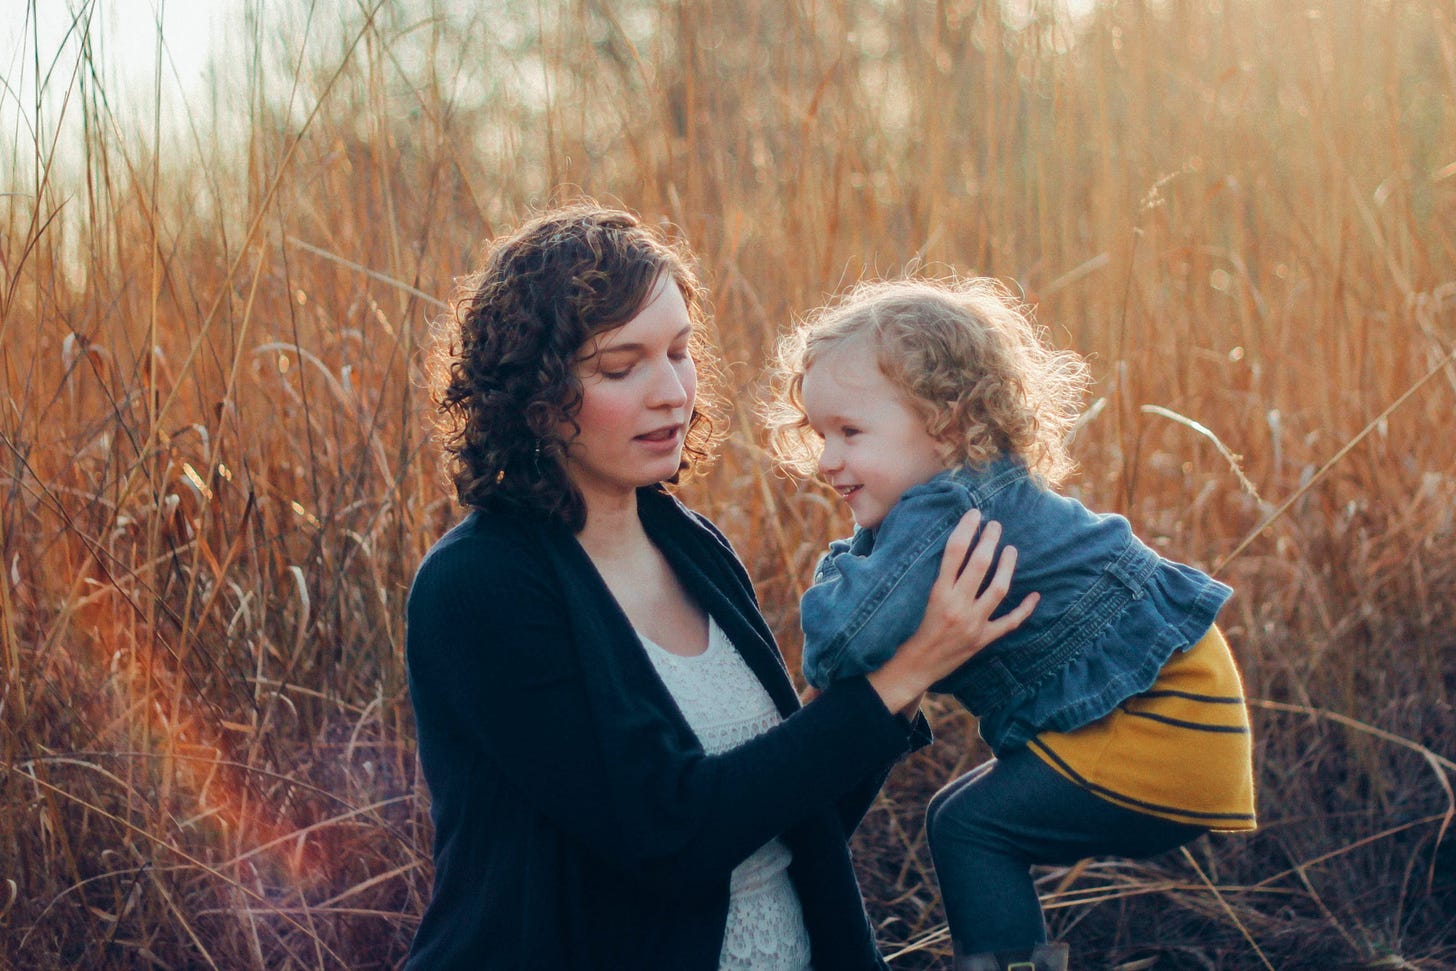 Adult with brown curly hair lifts a smiling toddler with blonde curly hair, in a wheat field